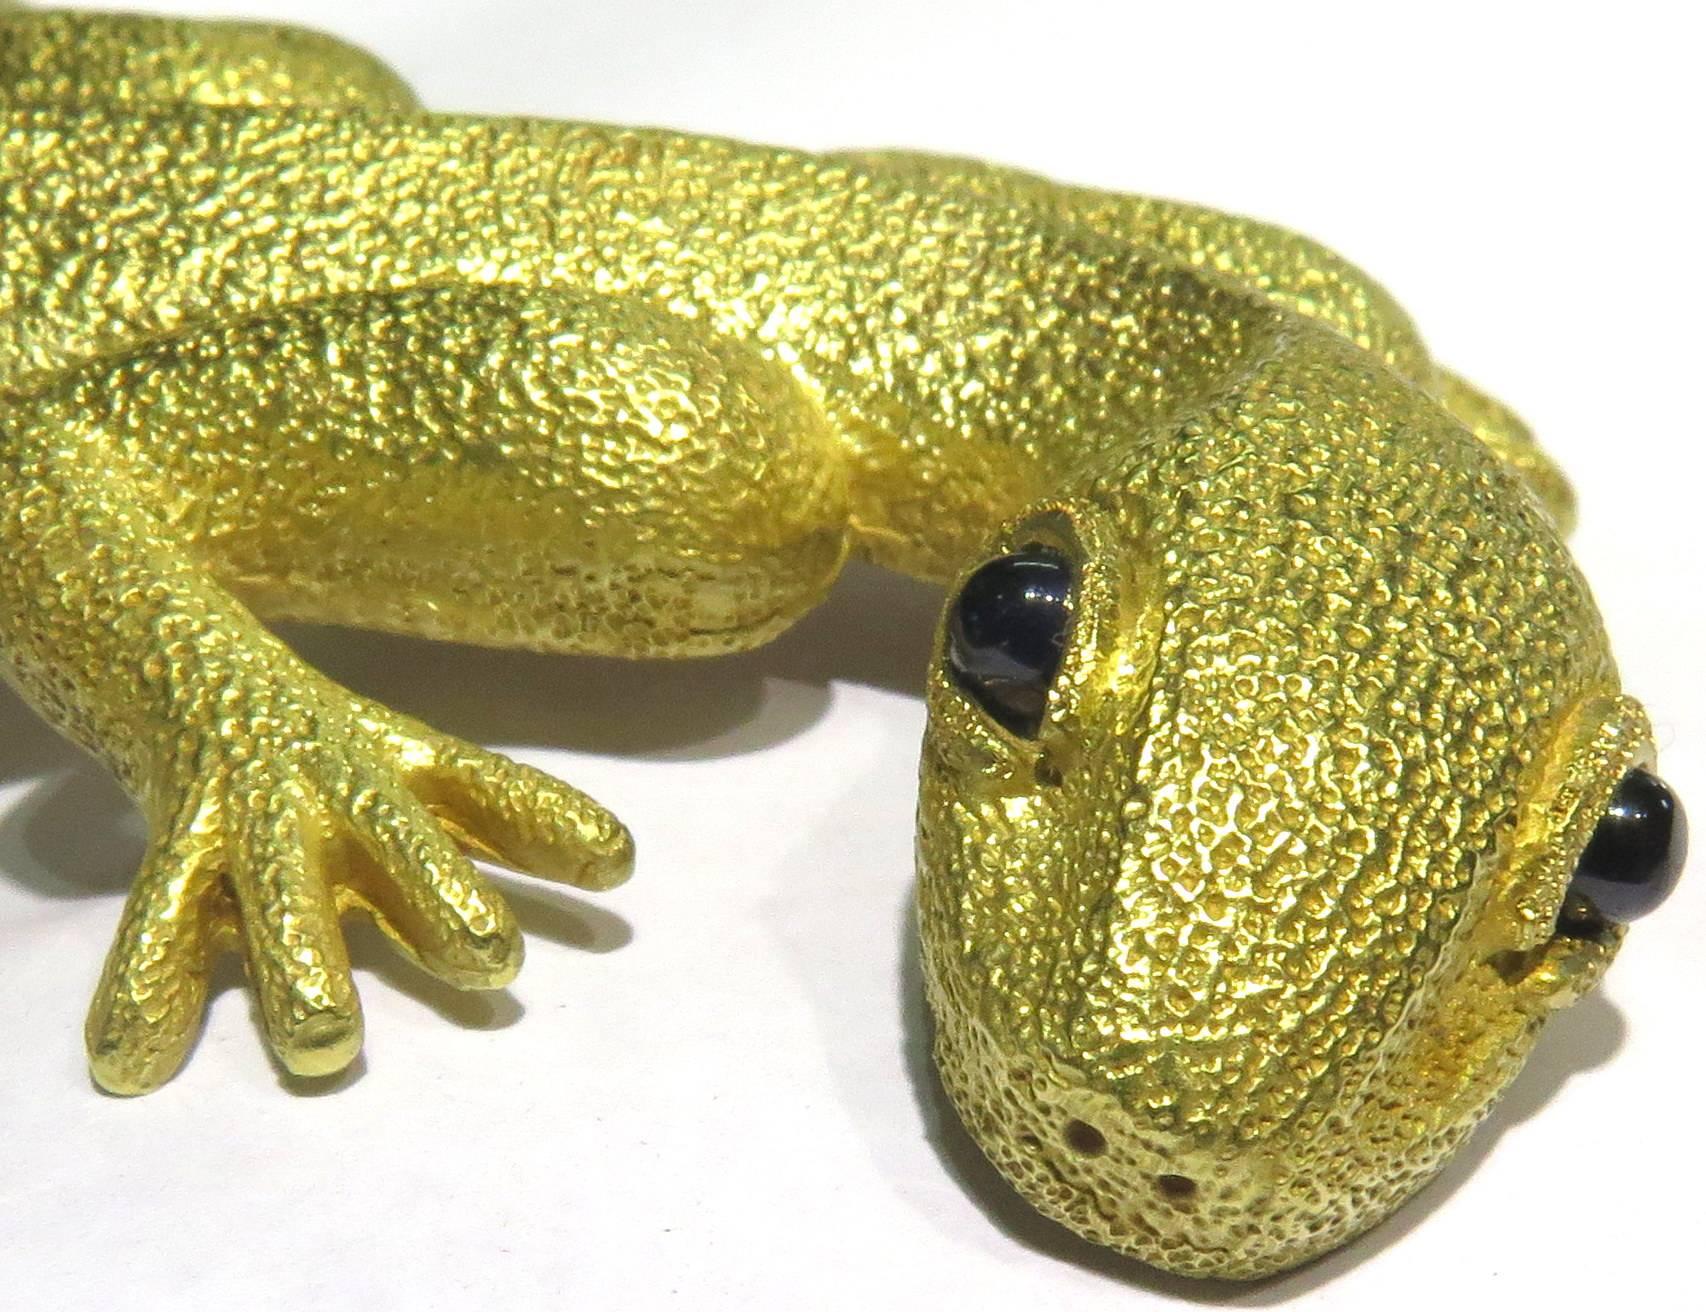 Kieselstein-Cord Enormous Gold Lizard/Salamander Sapphire Pin/Brooch Dated 1990 For Sale 4